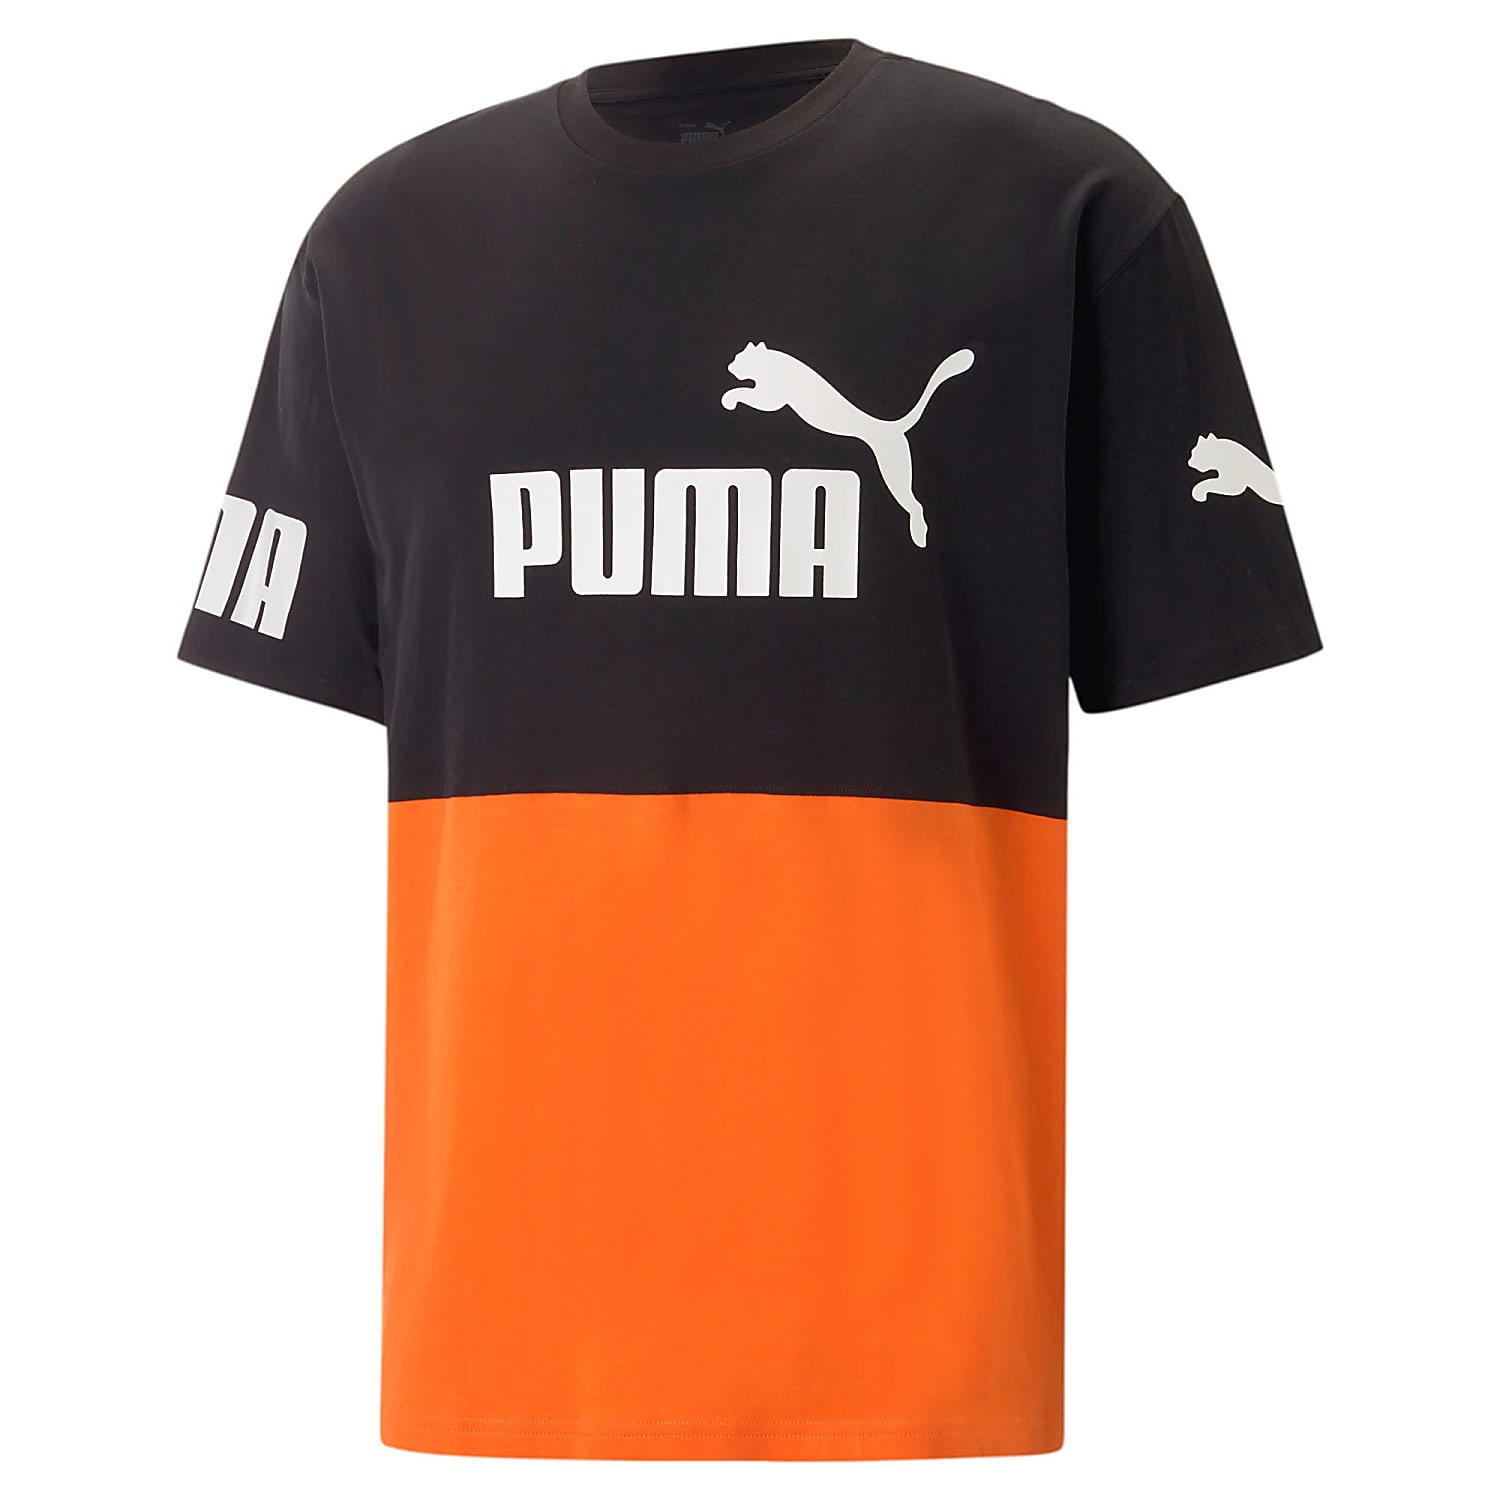 Cayenne Fast Puma - COLORBLOCK shipping TEE, cheap and Pepper M POWER PUMA